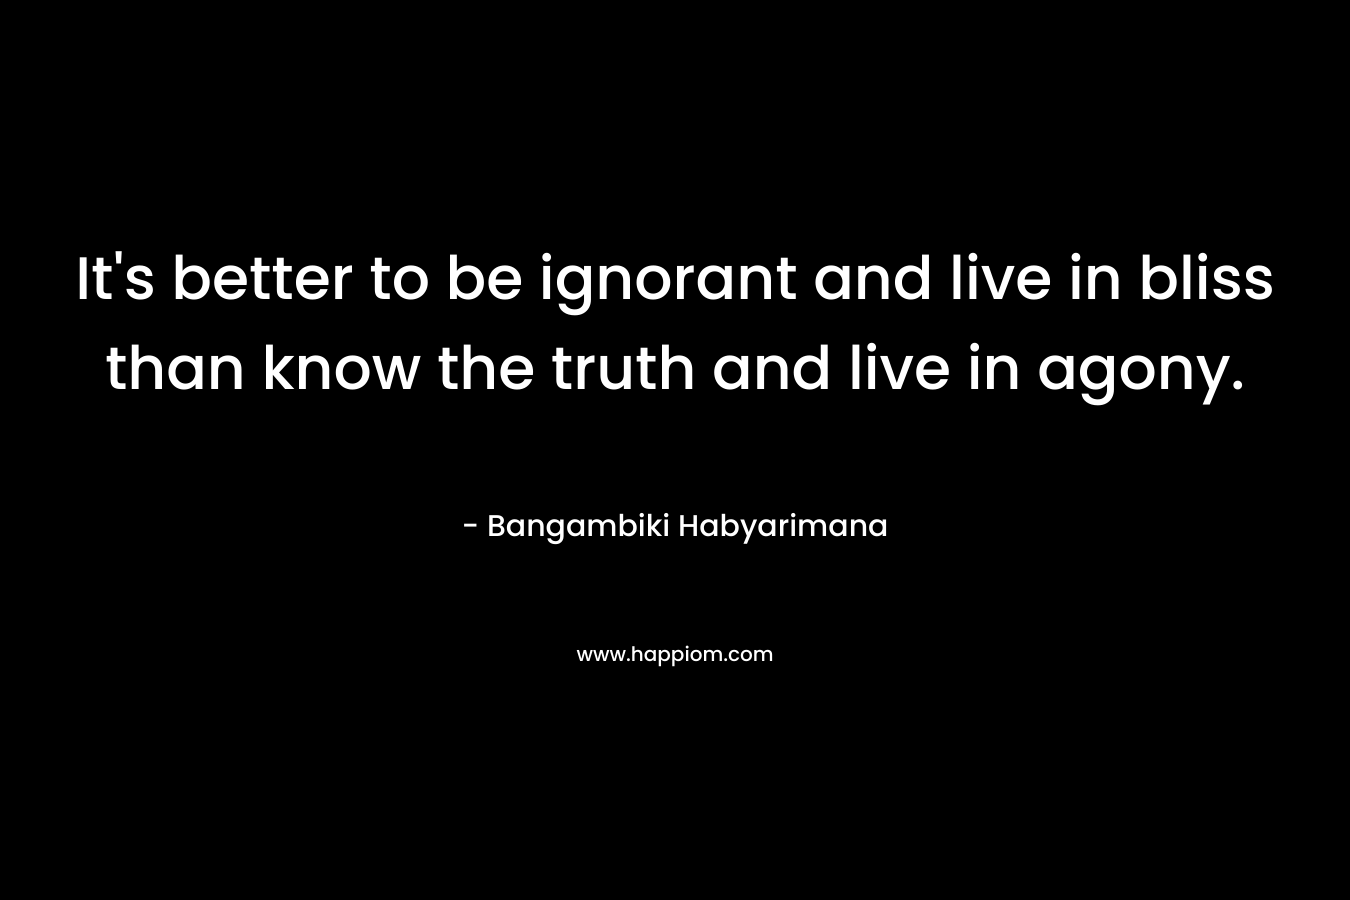 It's better to be ignorant and live in bliss than know the truth and live in agony.